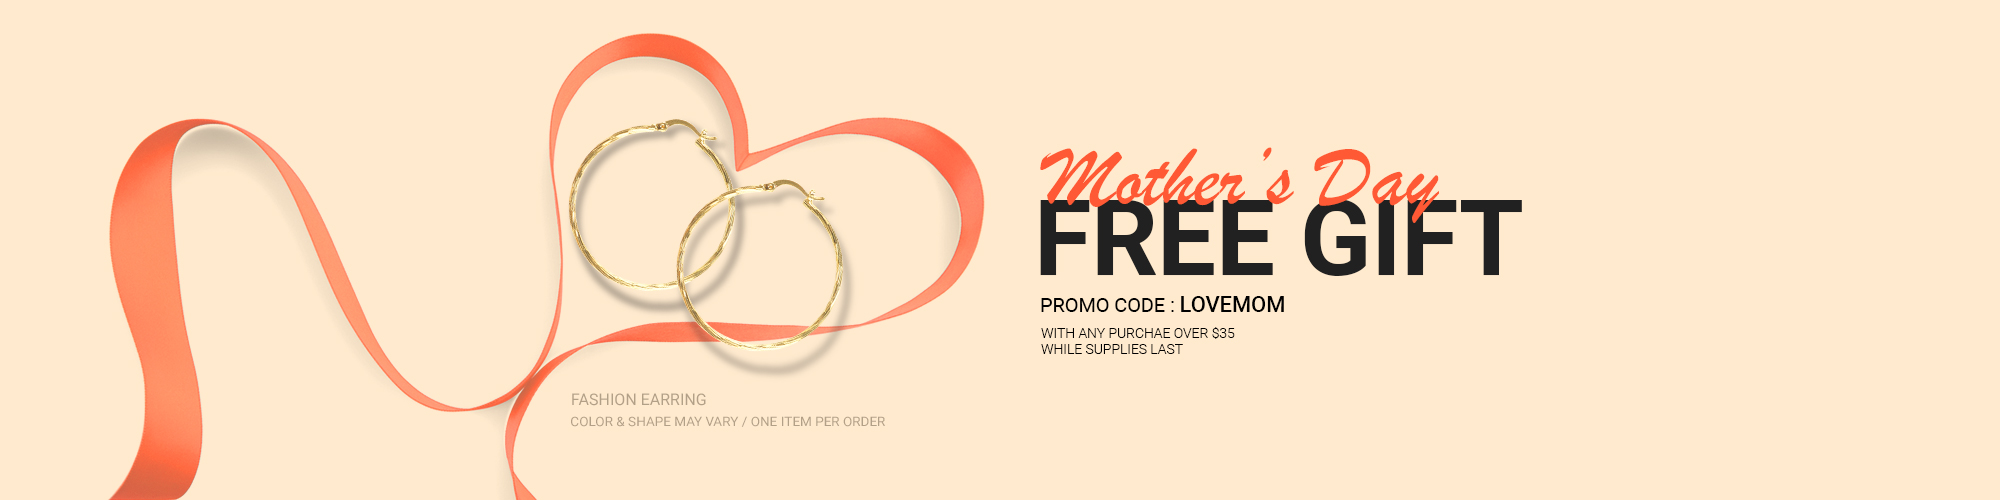 MOTHER'S DAY FREE GIFT